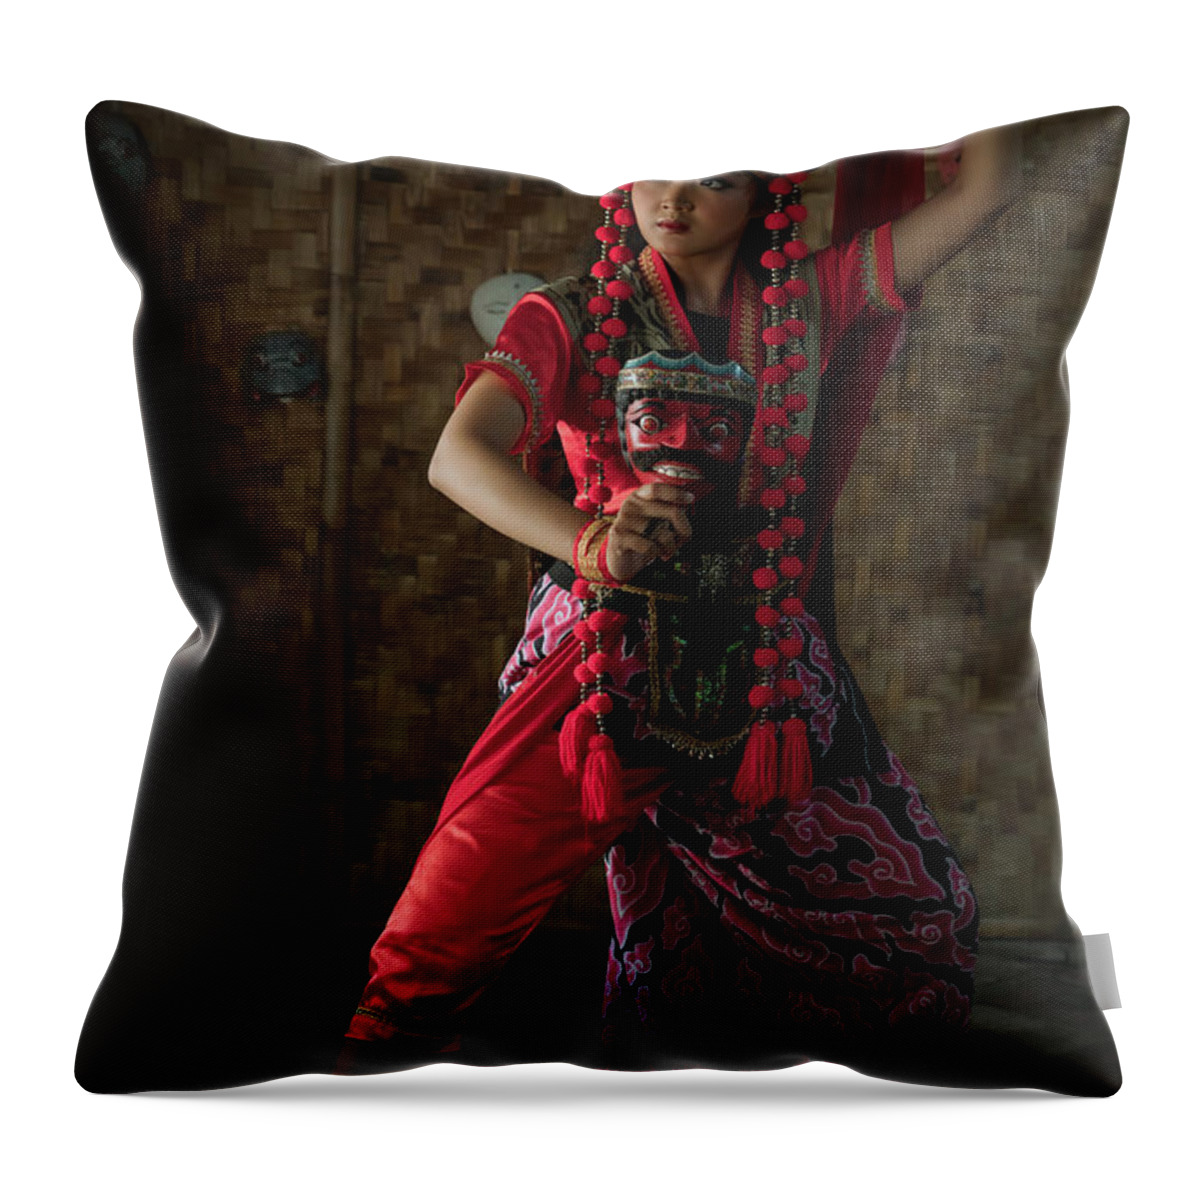 Mask Throw Pillow featuring the photograph The mask dancer by Anges Van der Logt